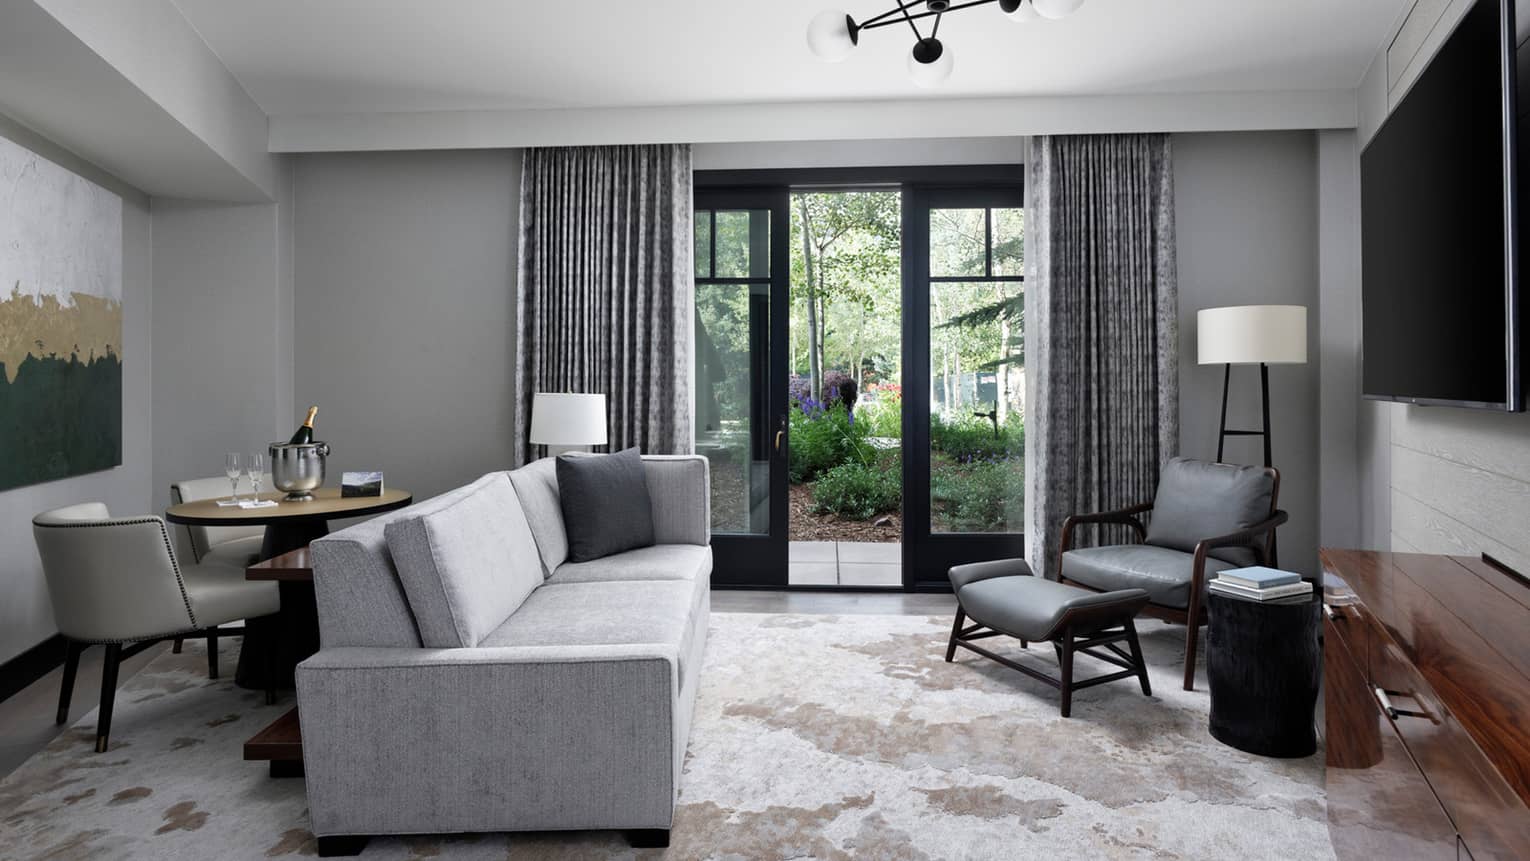 Guest living room with grey sofa, grey leather accent chair, small round dining table, glass doors opening onto terrace, area rug